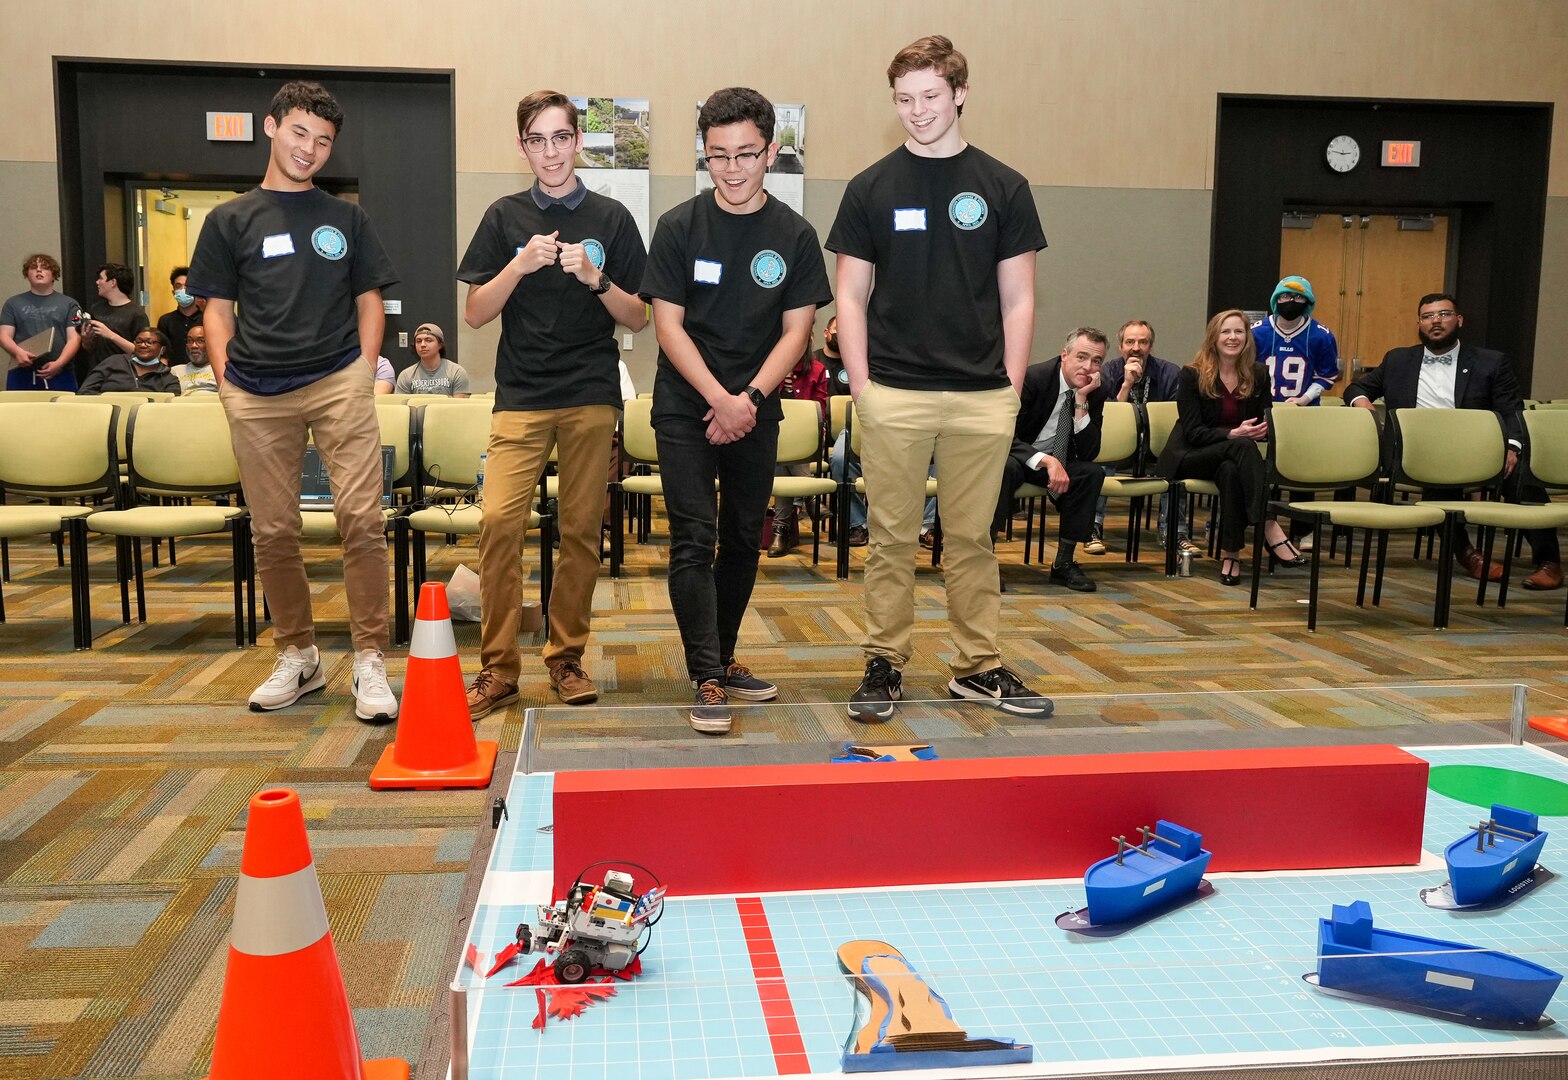 IMAGE: Fredericksburg Christian School (FCS) teammates (l to r) Gabe Ognek,Cody Cockrell, Yuki Jones and Jack Knewtson smile as their robot completes the obstacle course at the innaugural Innovation Challenge @Dahlgren. The FCS team took first place earning a $3,000 cash prize.